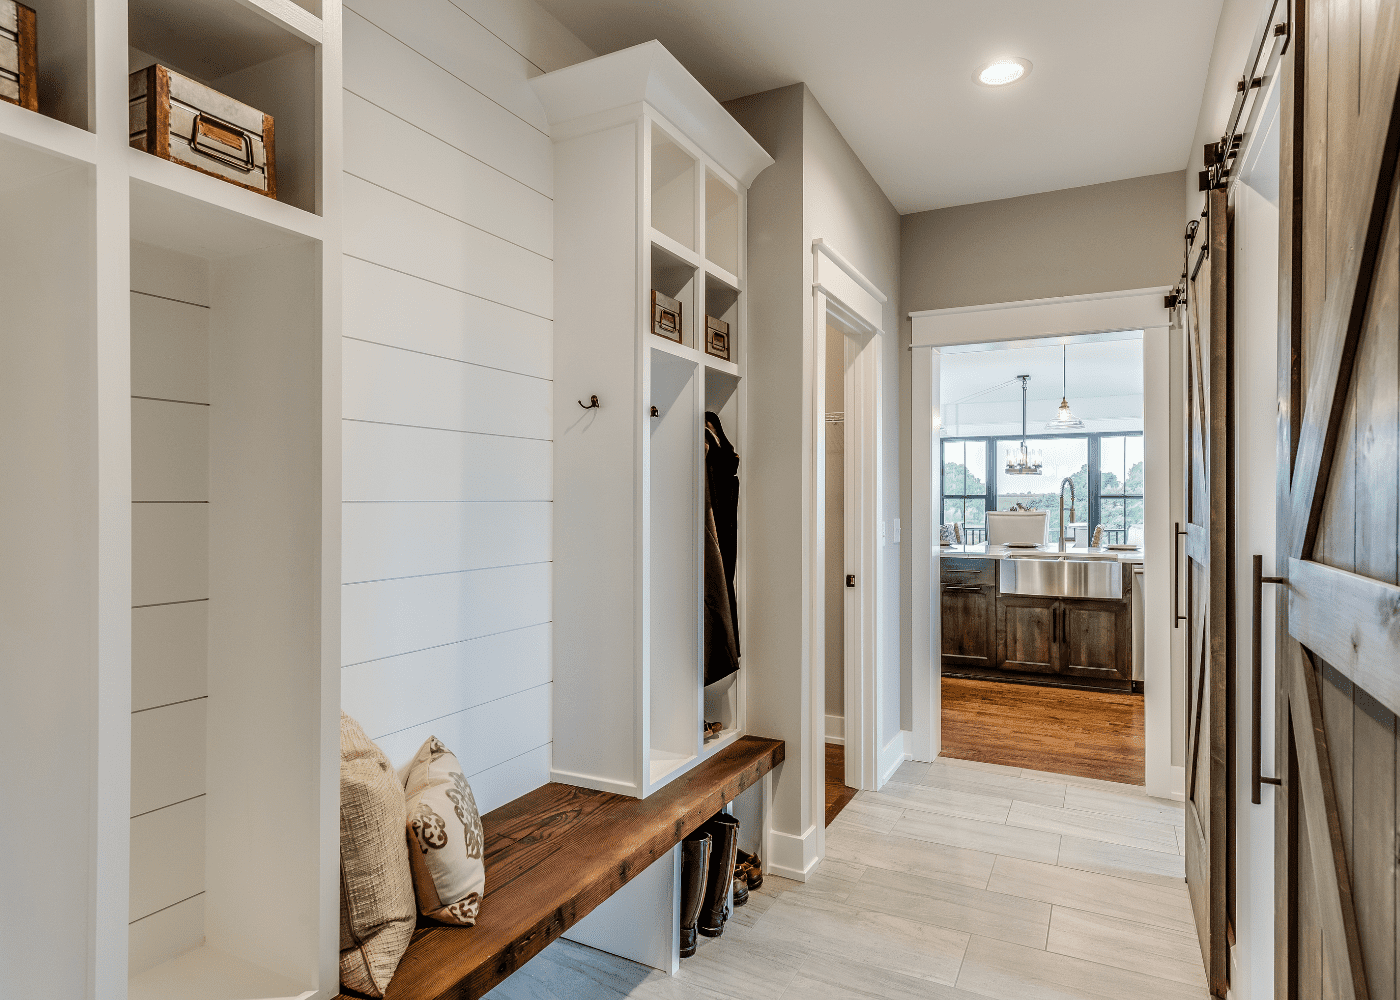 What are mudrooms?